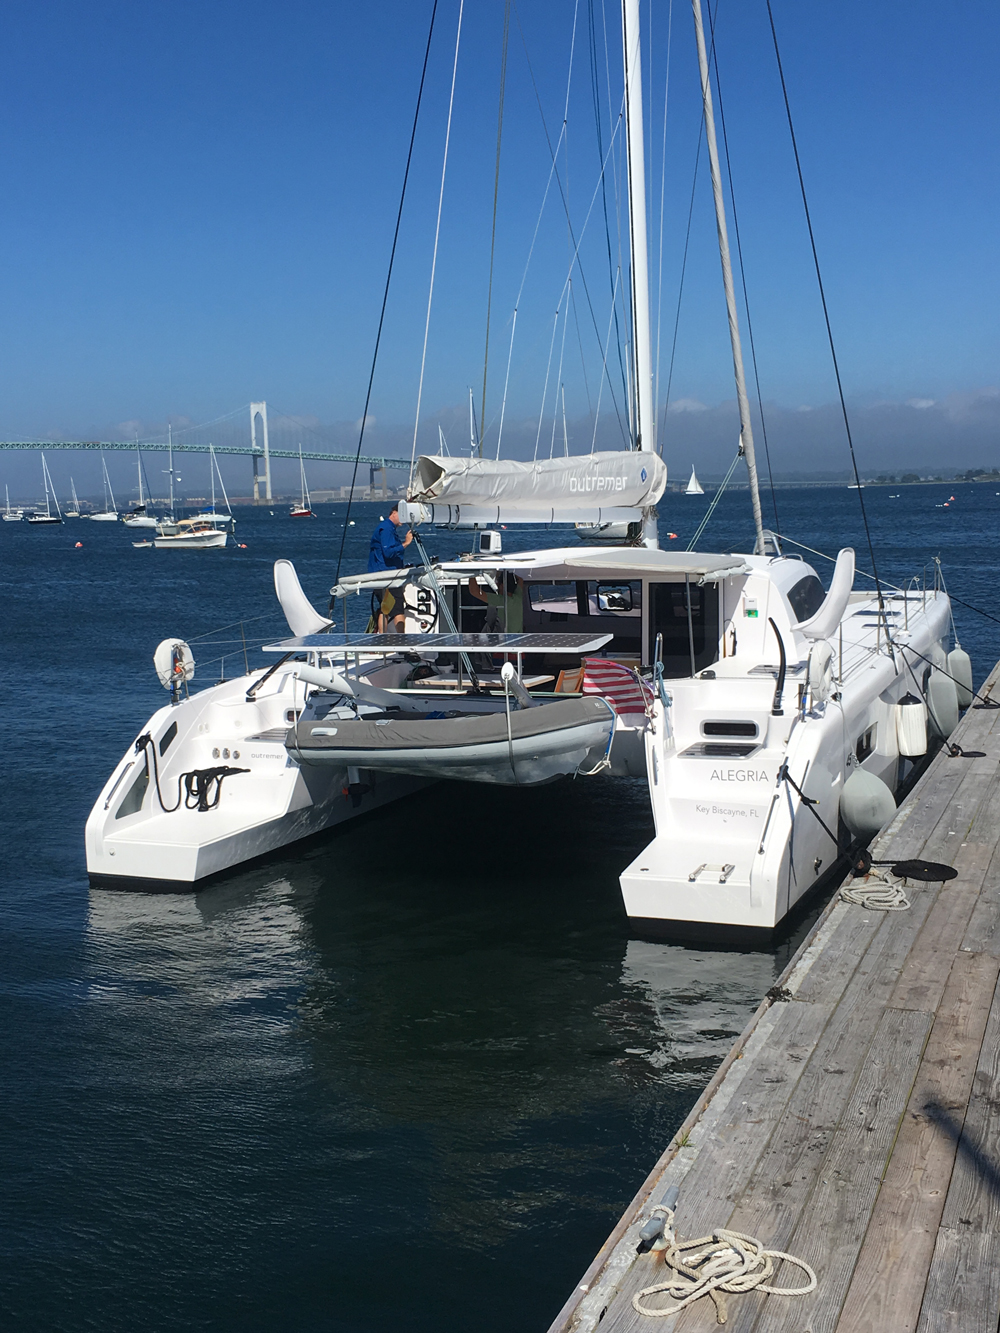 Outremer owner with Just Catamarans brokers